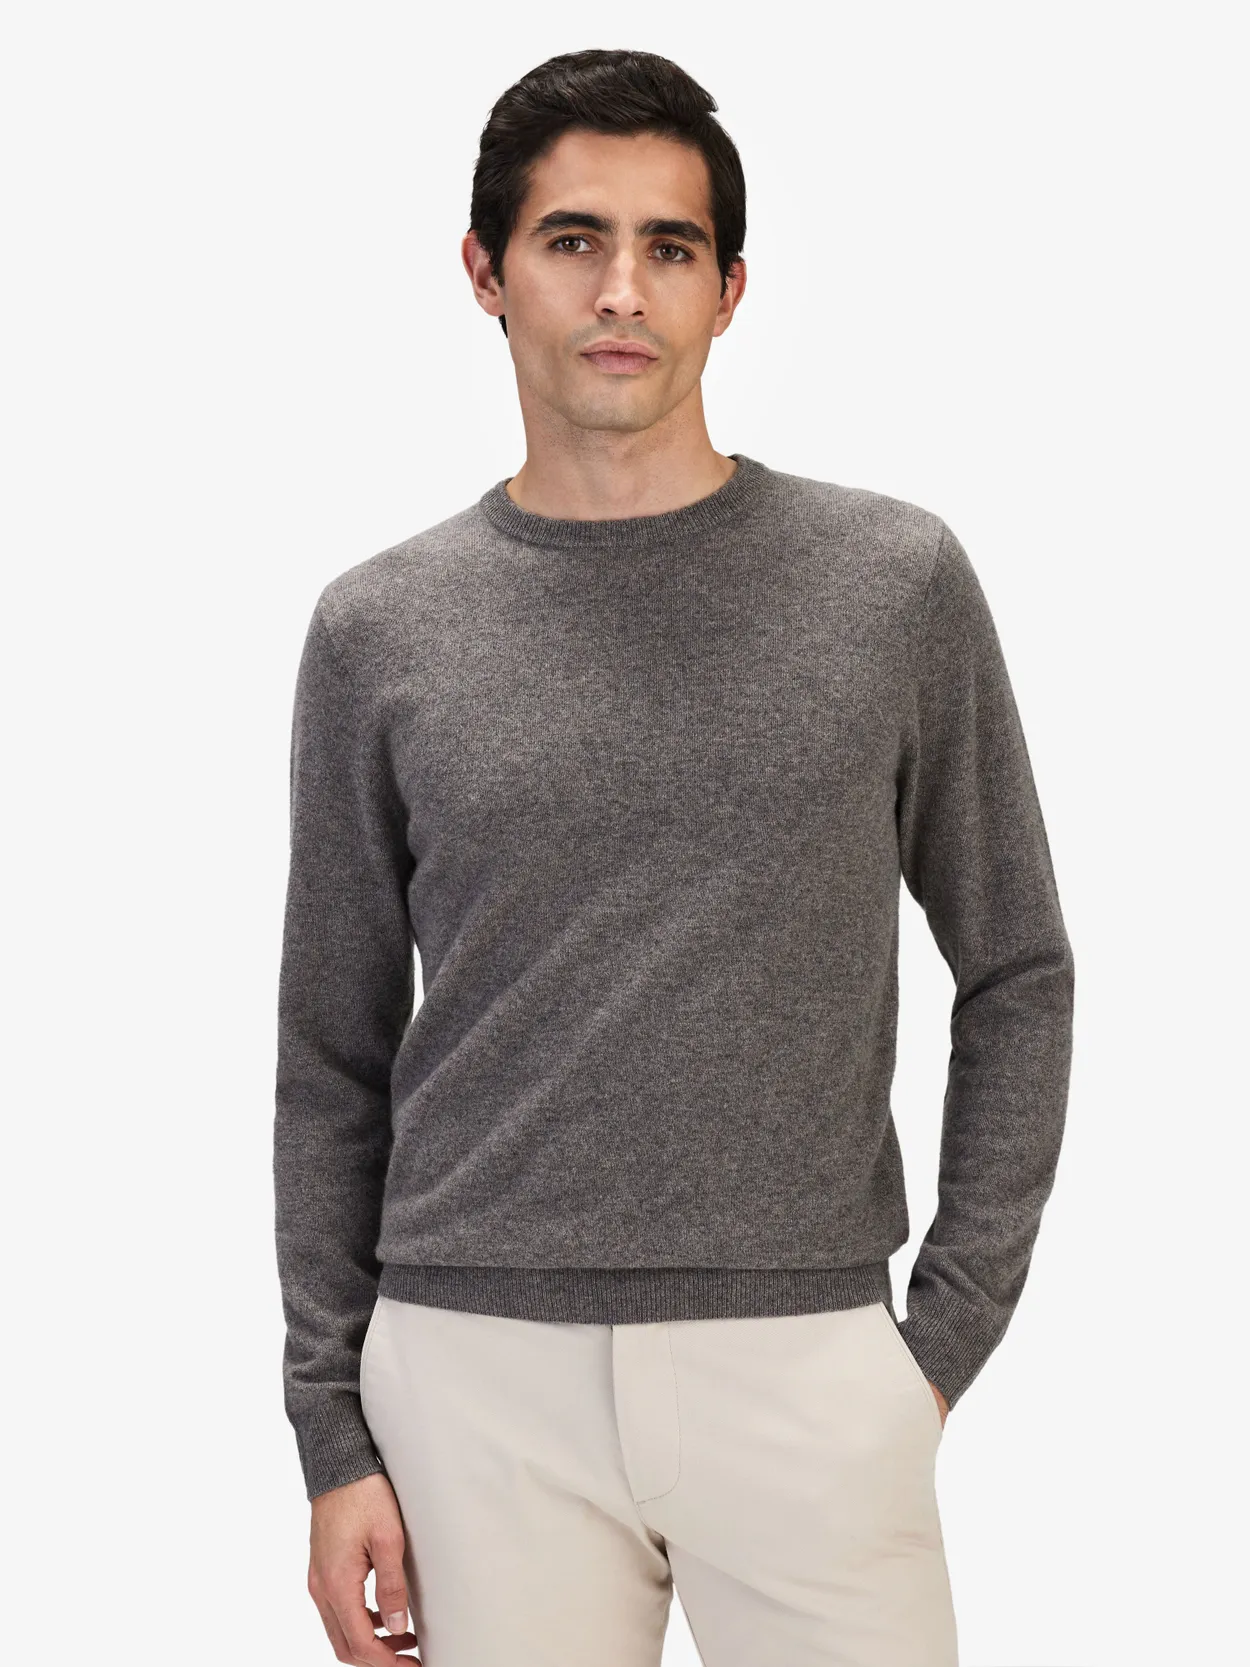 Light Brown Cashmere Sweater